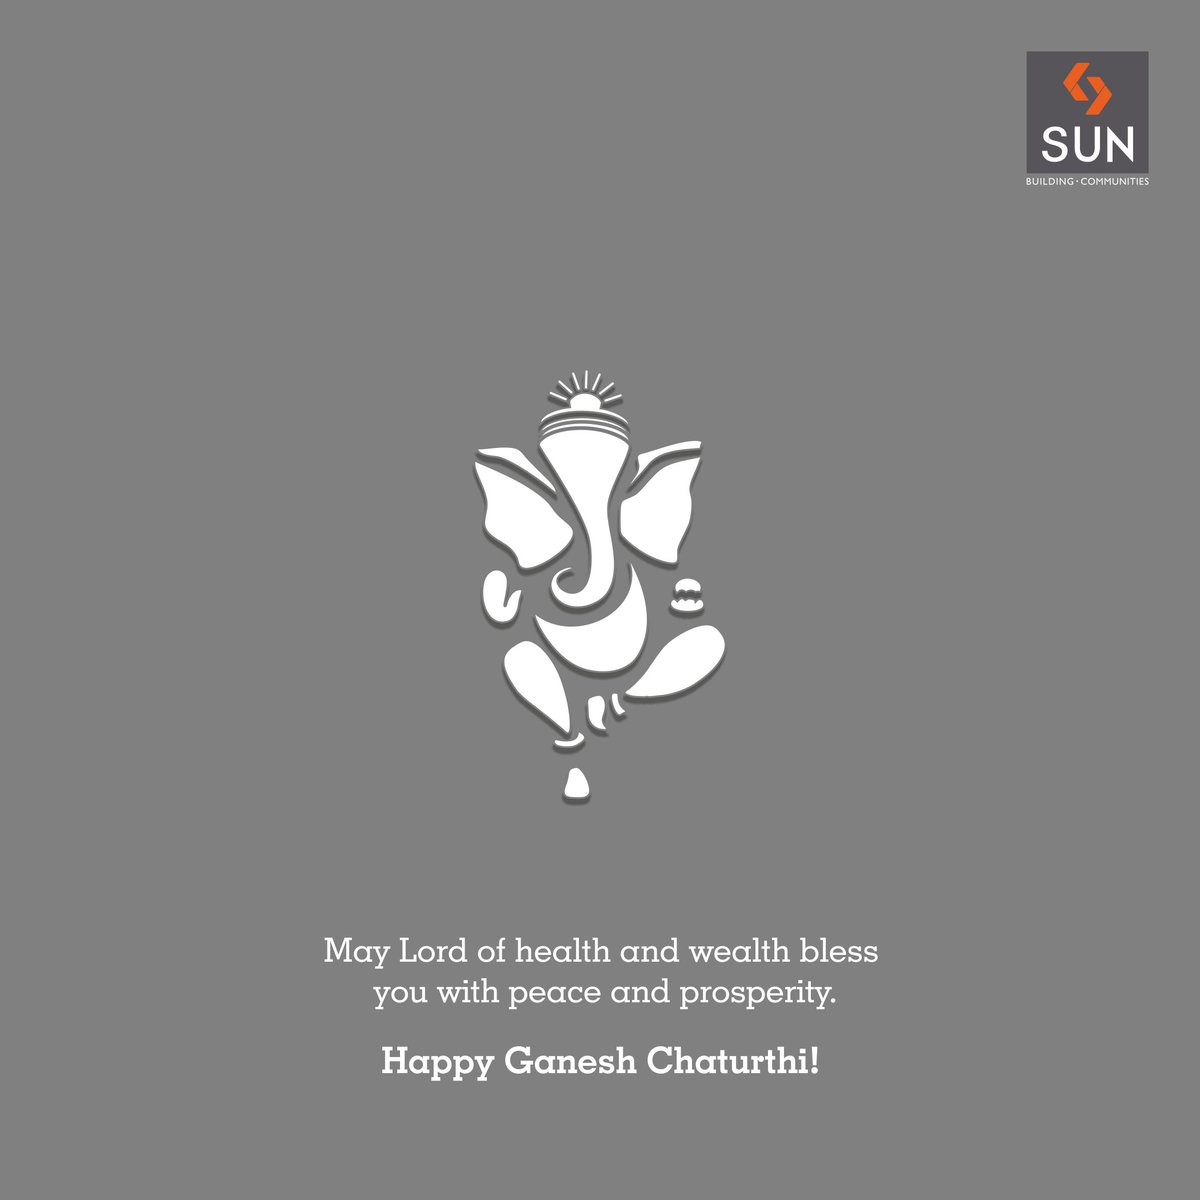 On this holy day, we wish #LordGanesha glitter your life with good fortune.
Happy #GaneshChaturthi to all! https://t.co/nHKlNoKUK4